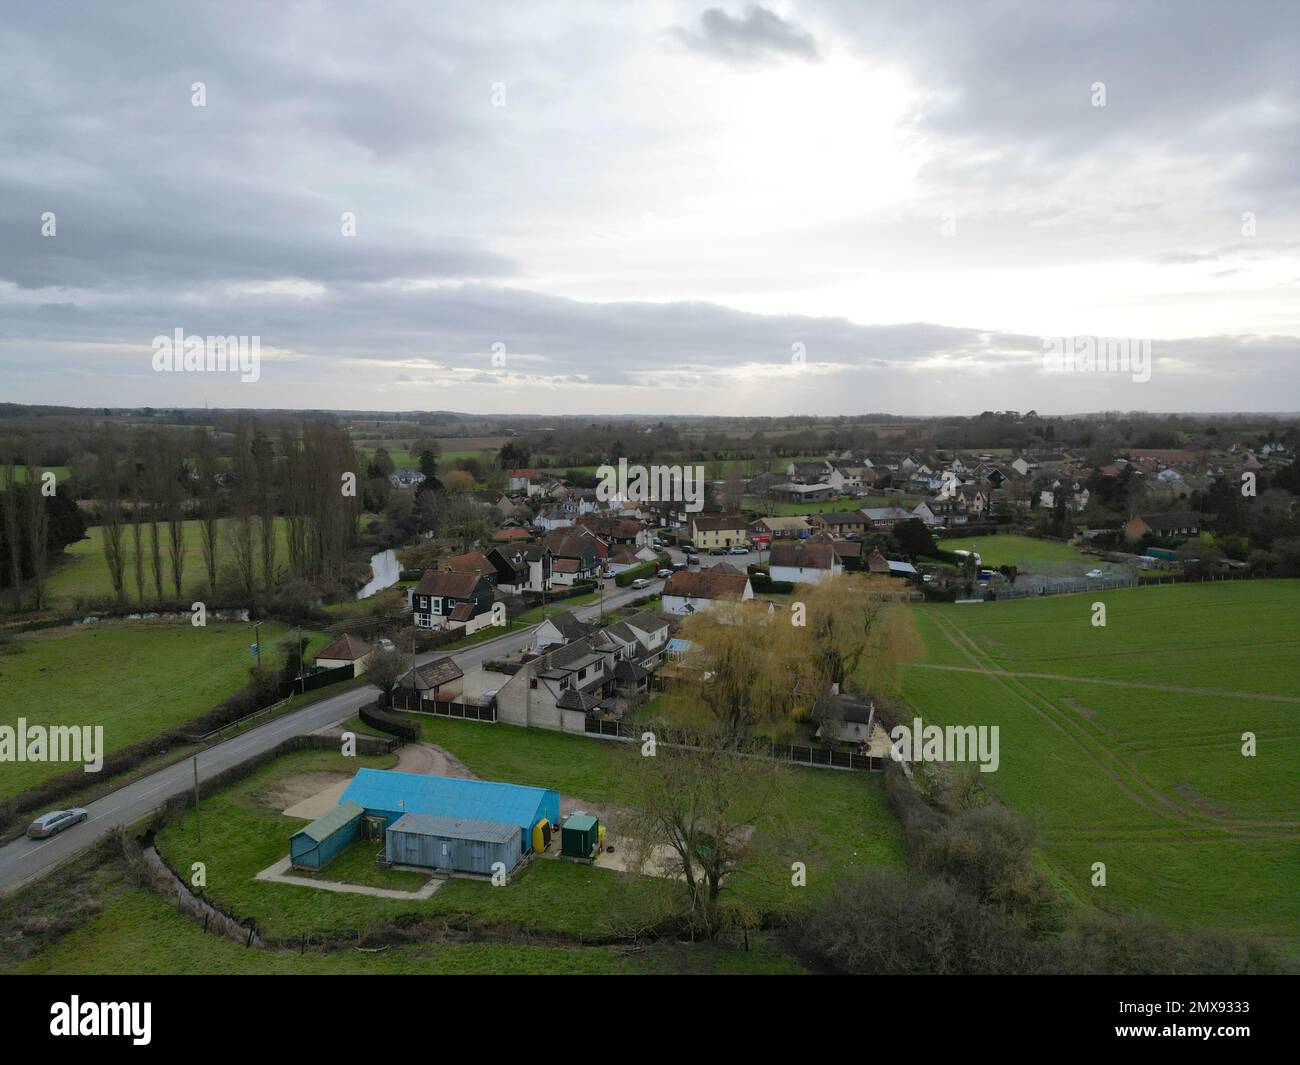 Fyfield ,small village and farm fields Essex UK  Drone, Aerial, view from air, birds eye view, Stock Photo